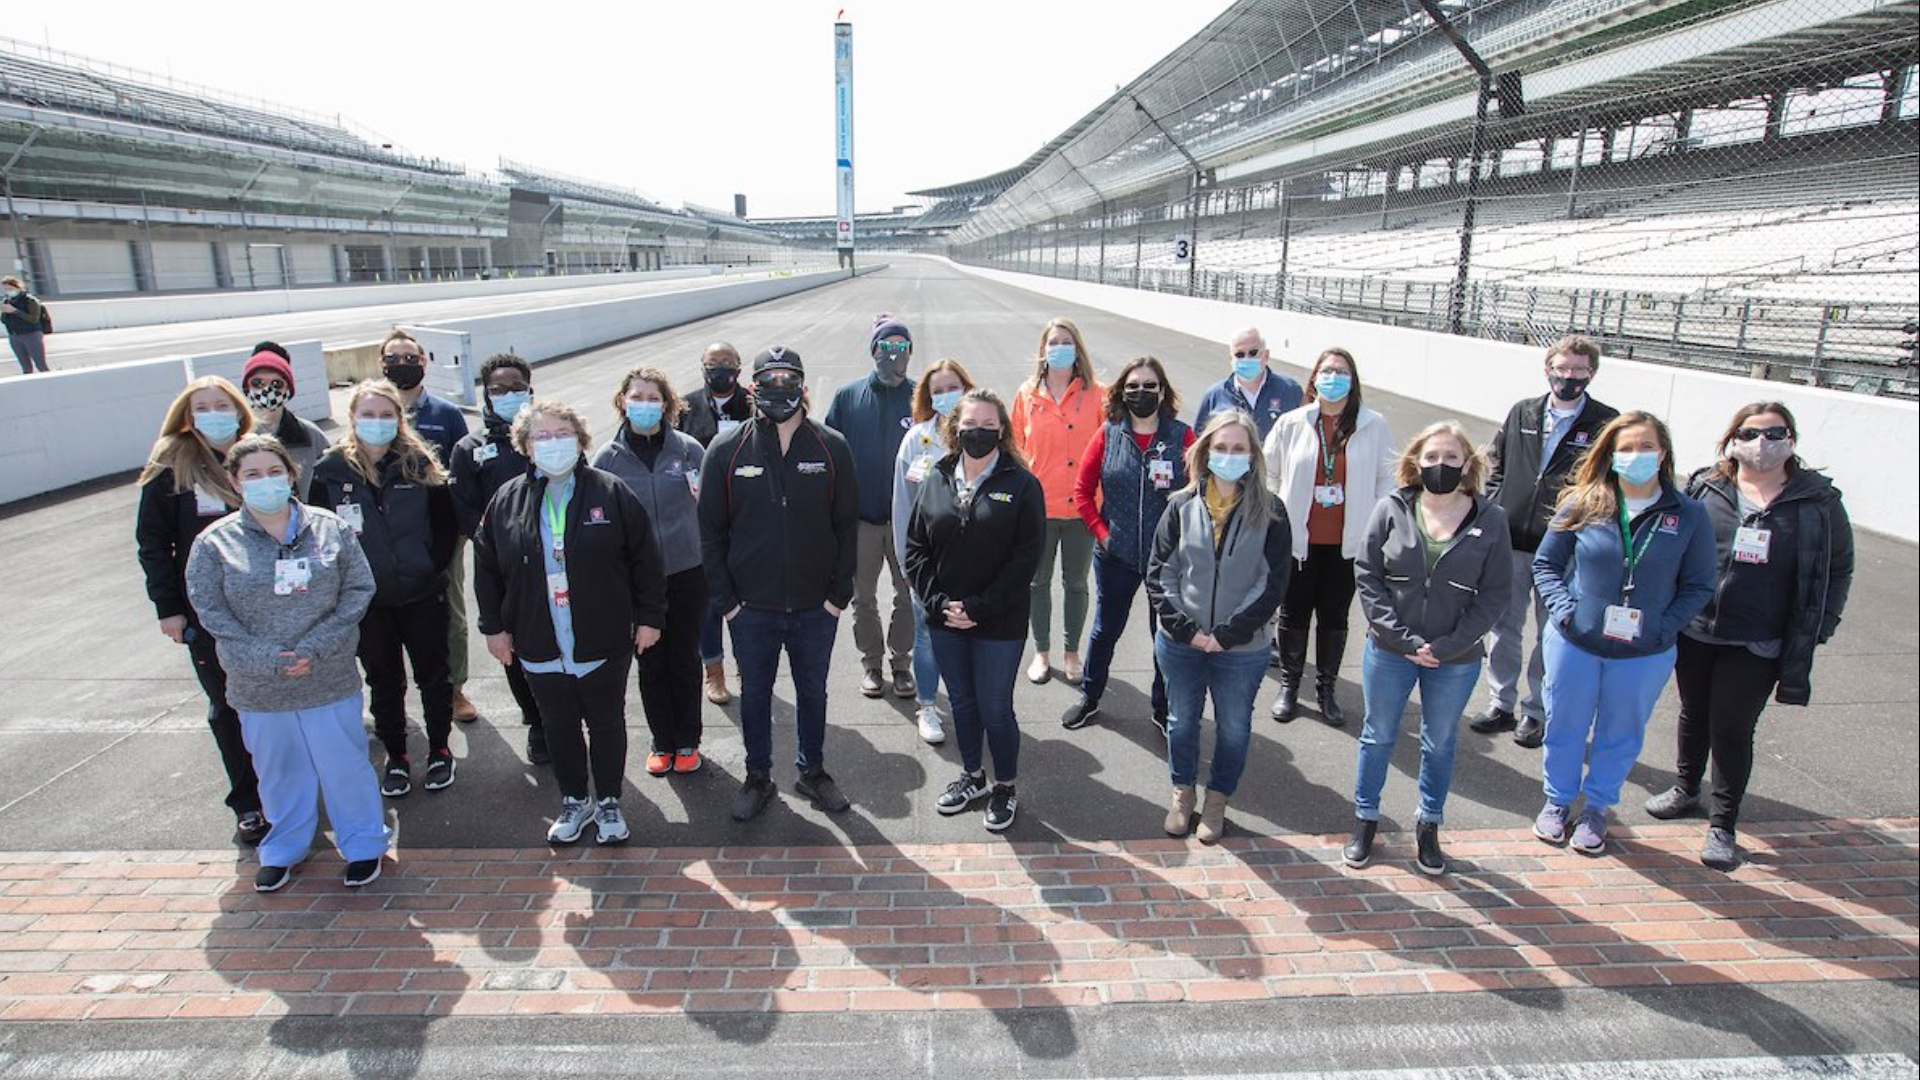 The health care heroes of the past year sped around the Indianapolis Motor Speedway before helping 100,000 Hoosiers get vaccinated against the coronavirus.